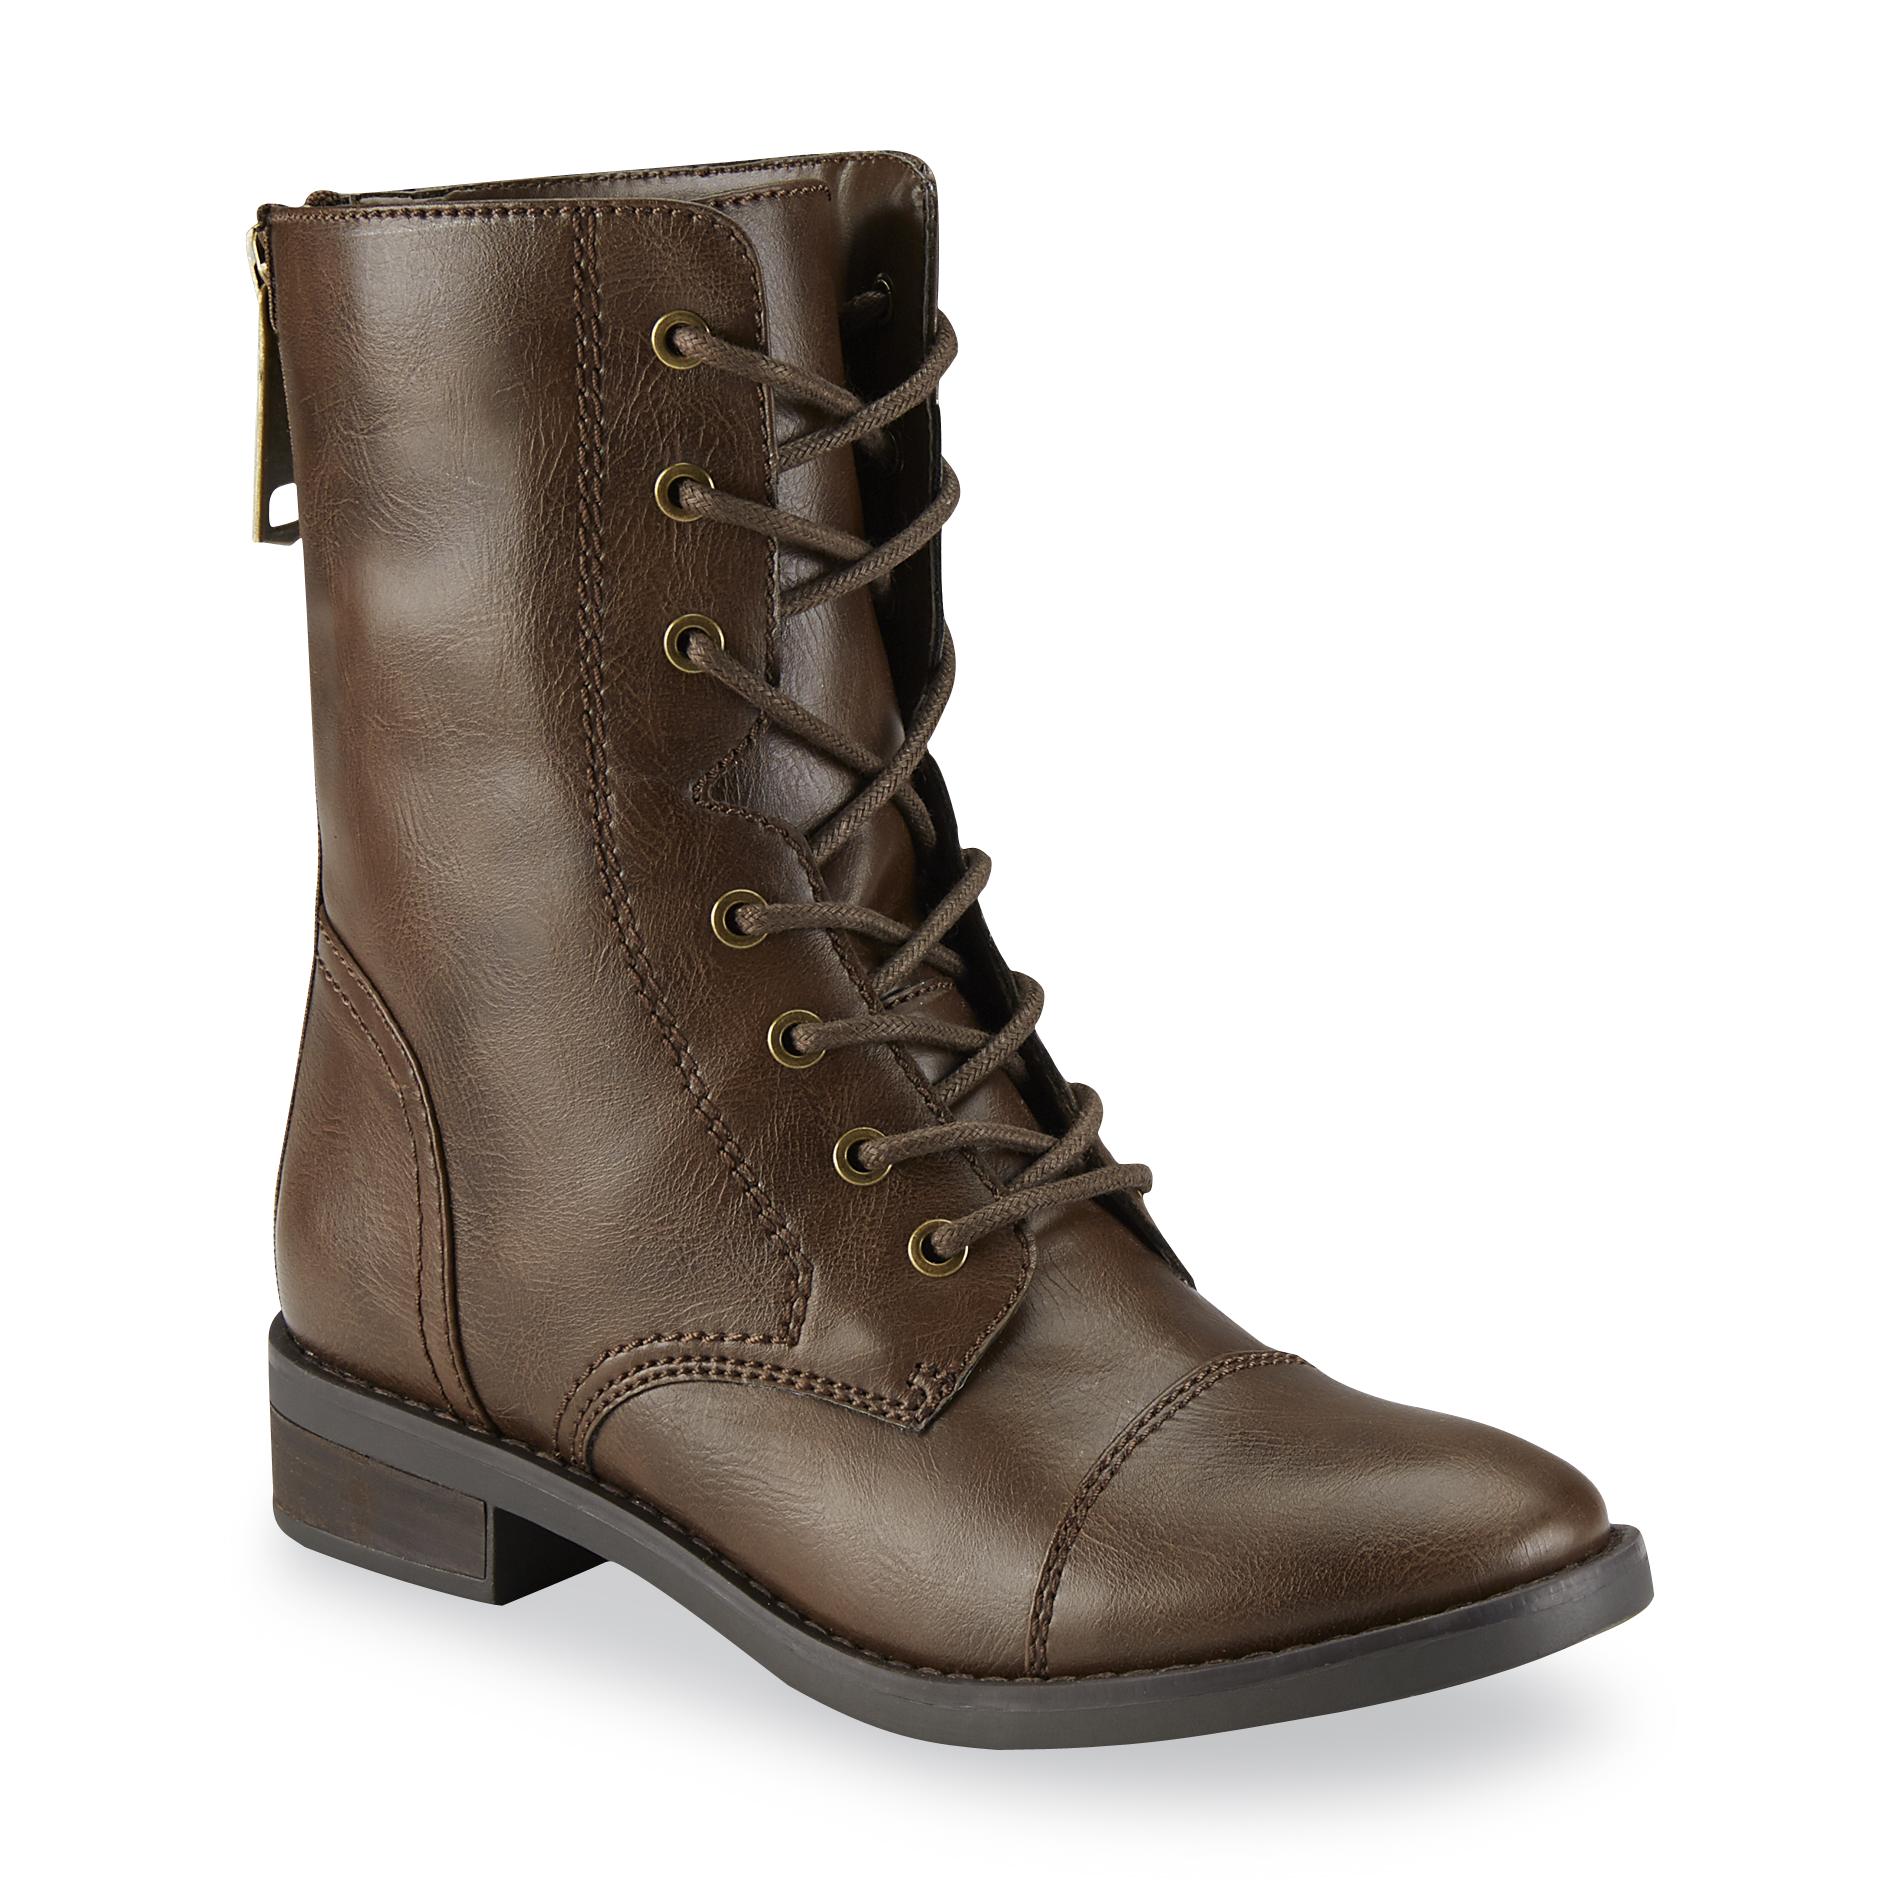 brown boots for women